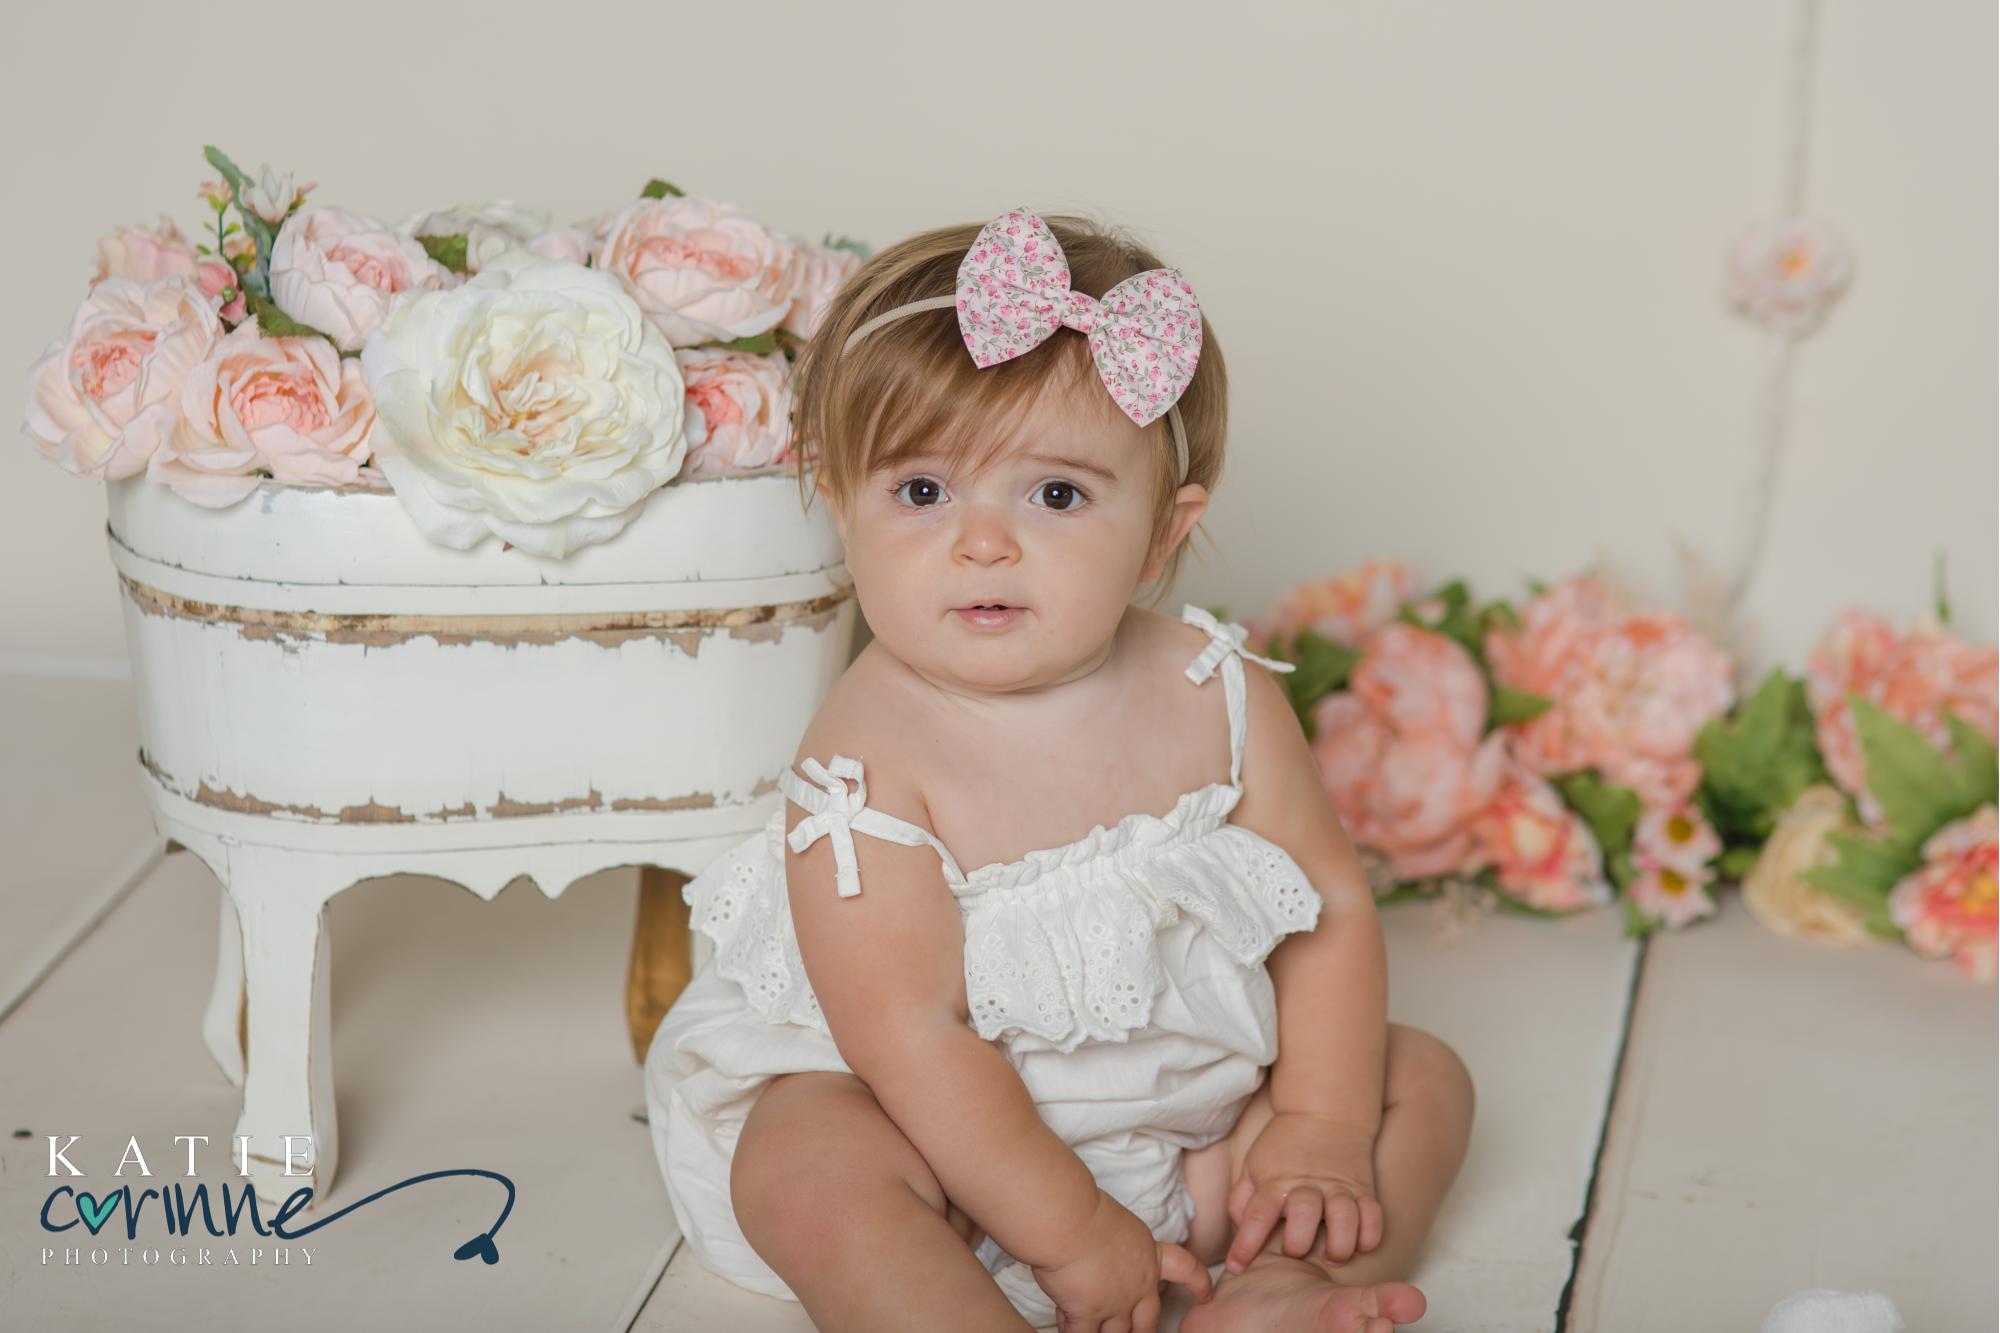 Brynlee at her one year cake smash session